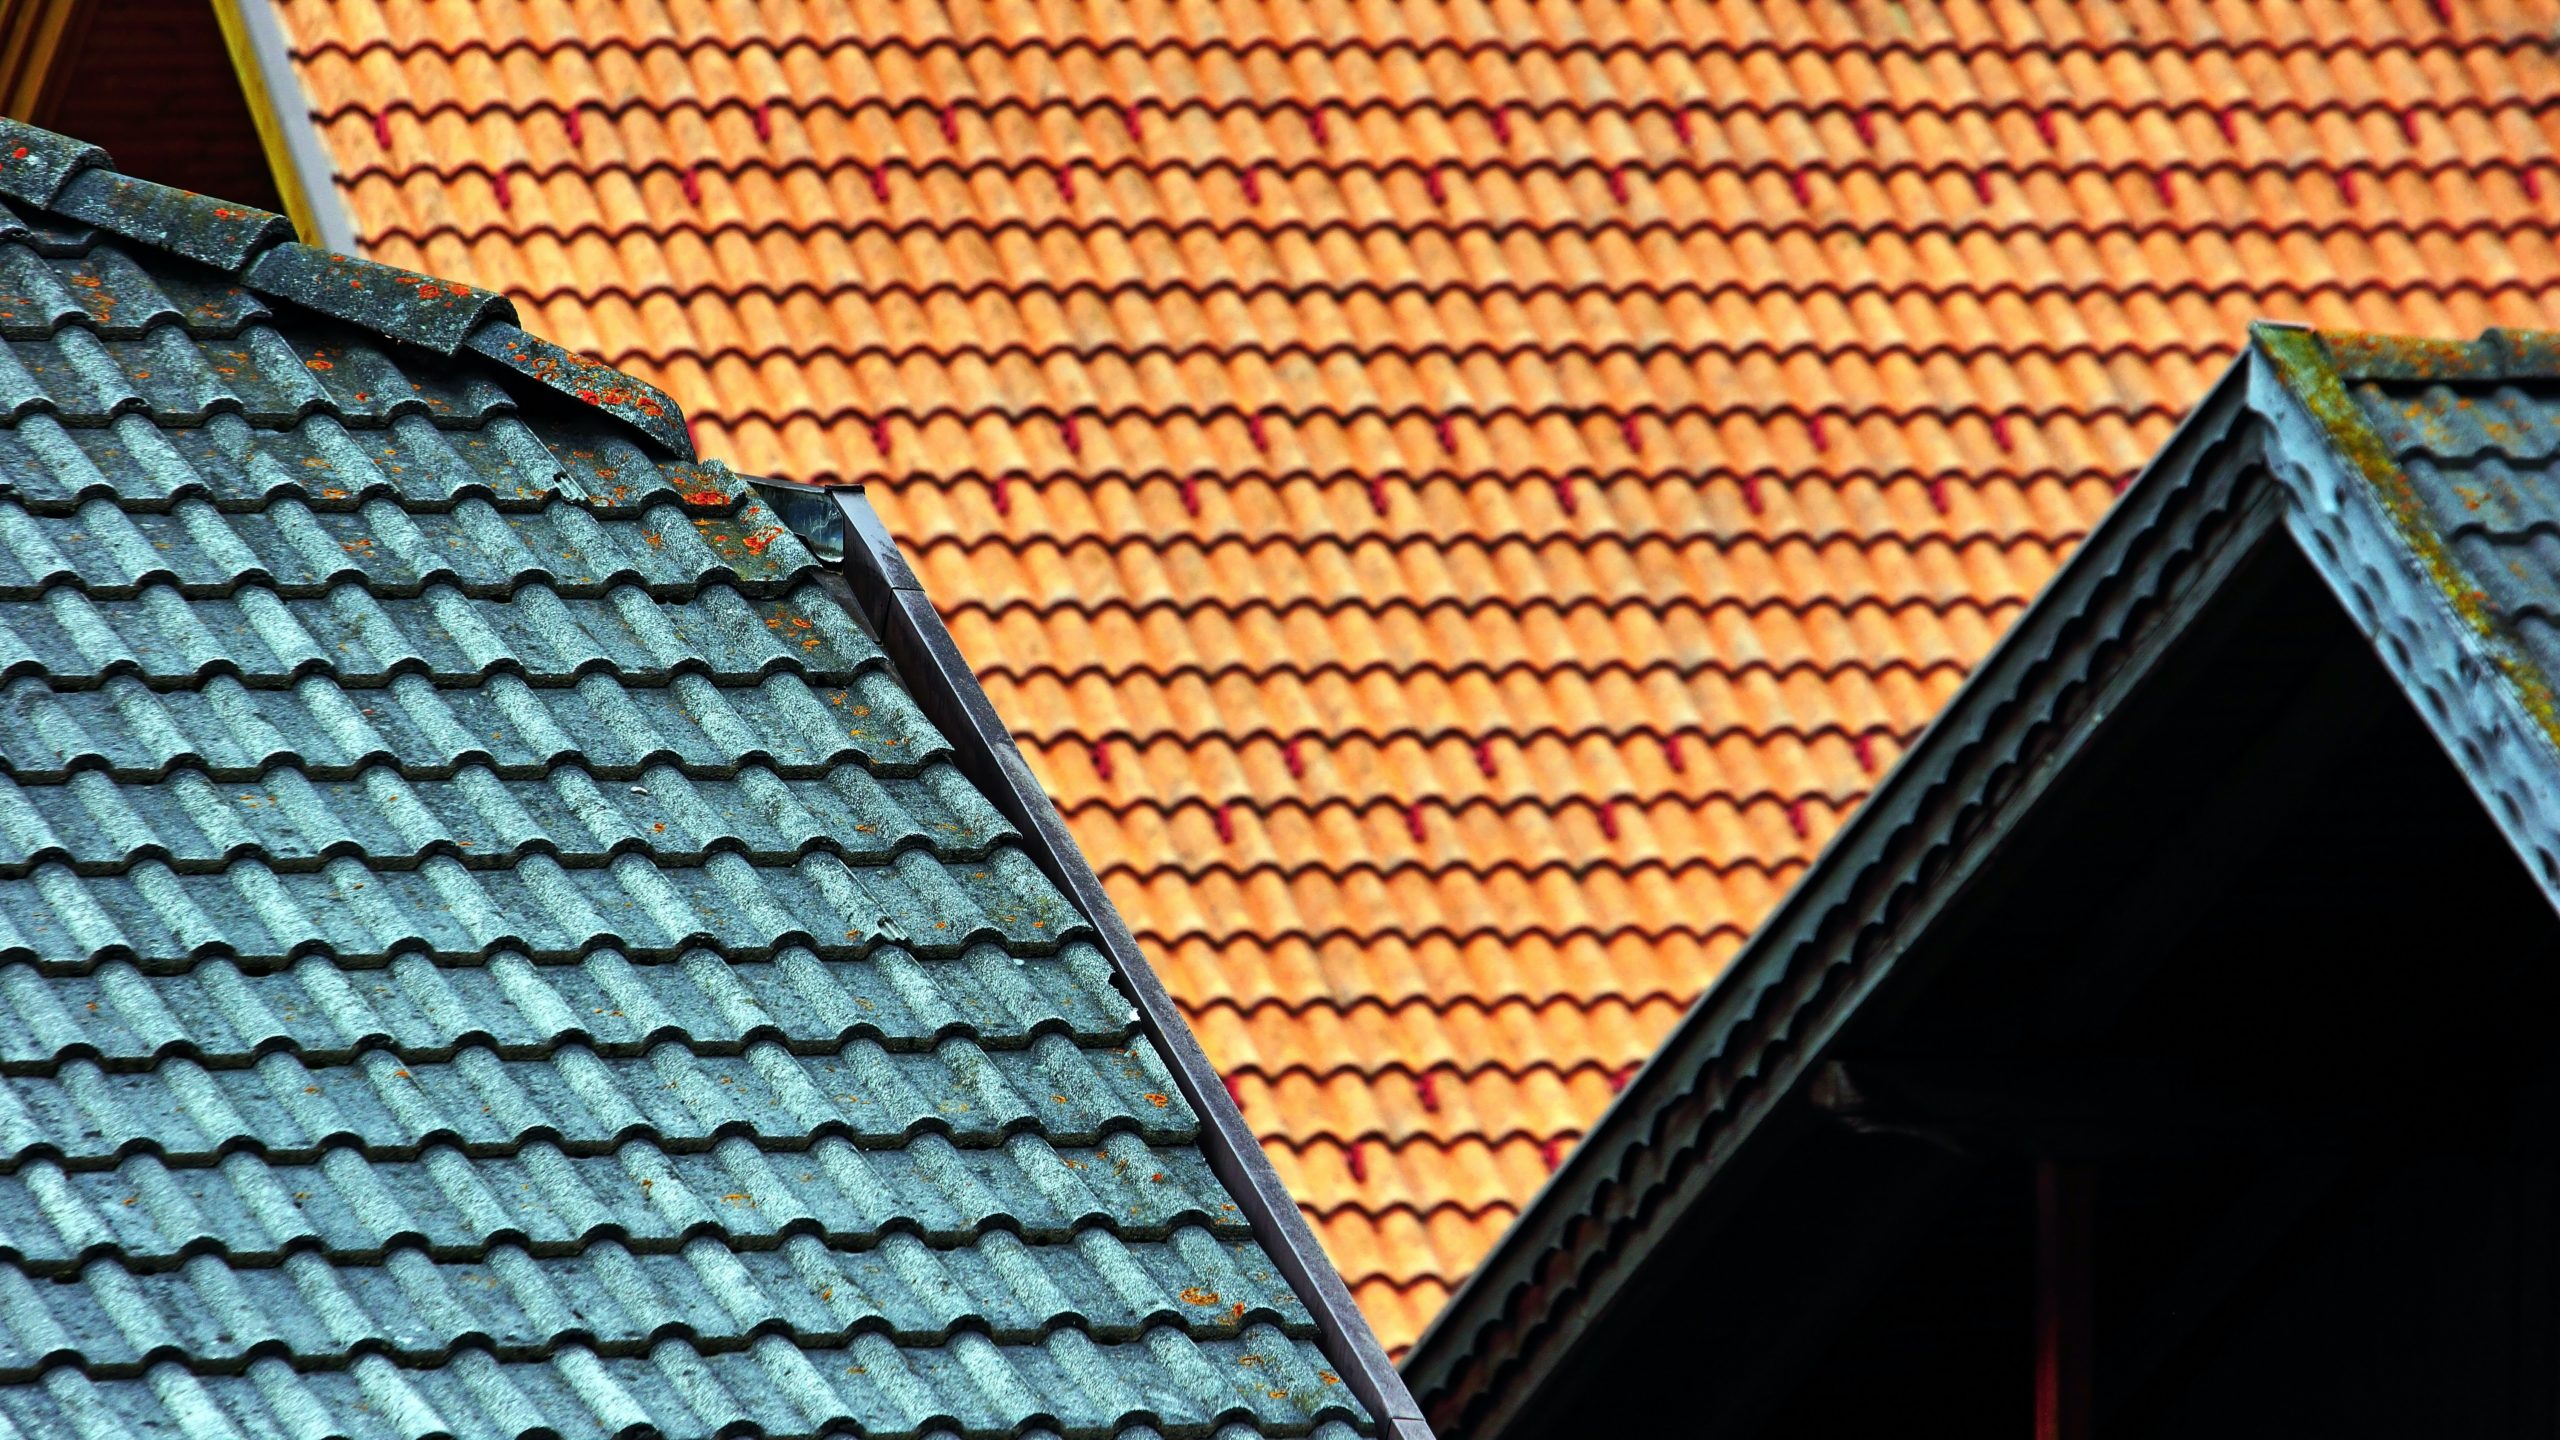 Home's Roof